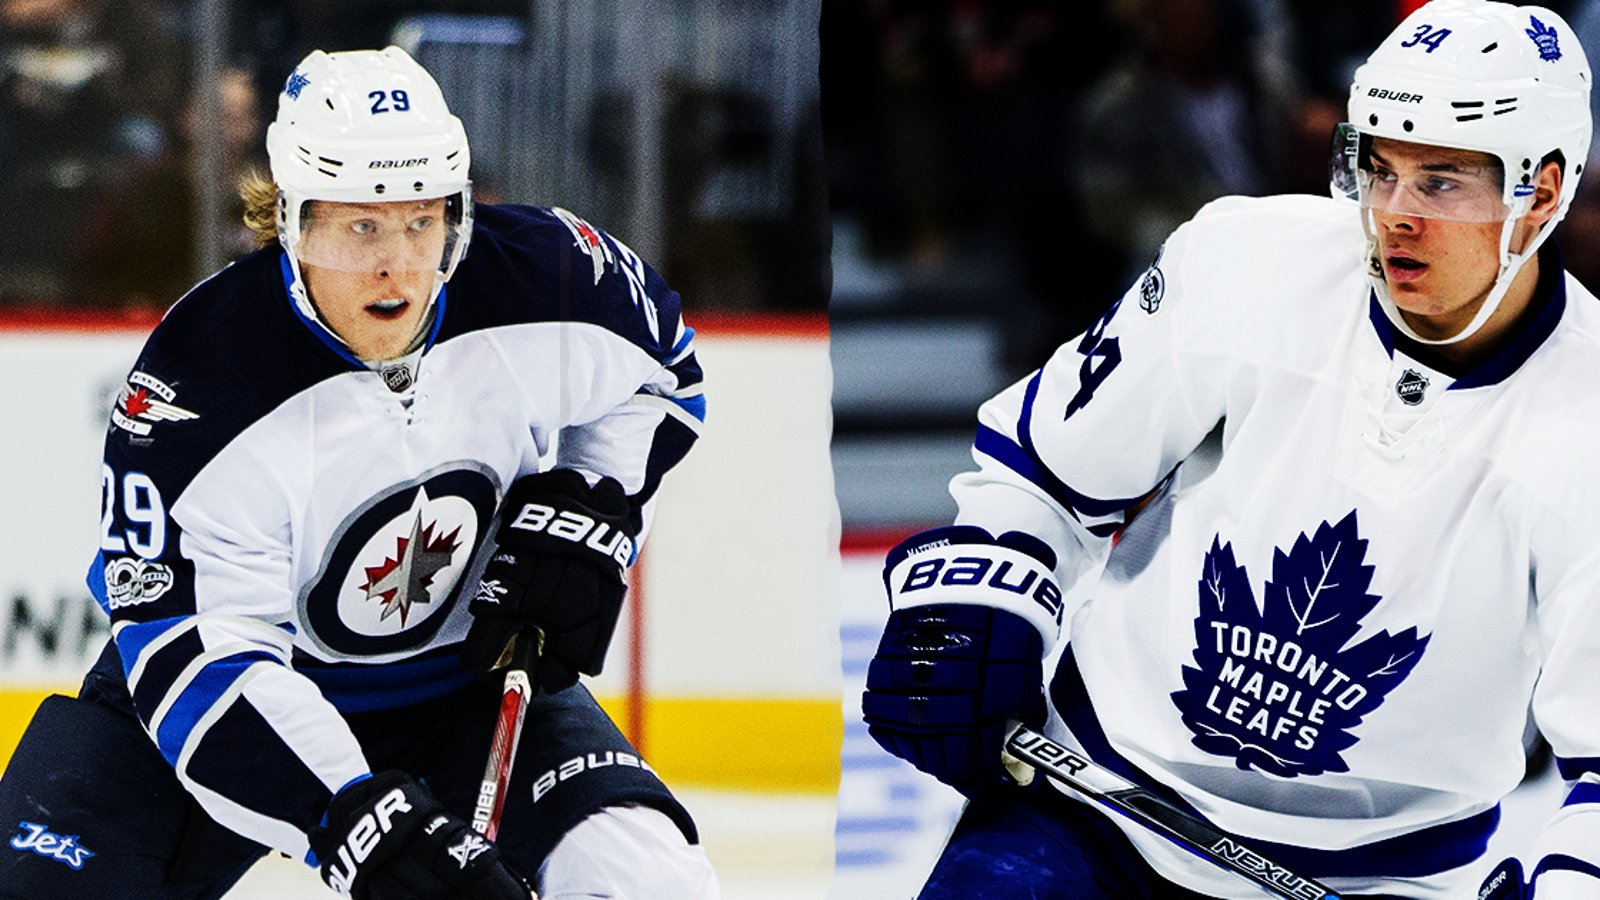 Matthews or Laine? Who's got the upper hand and why.